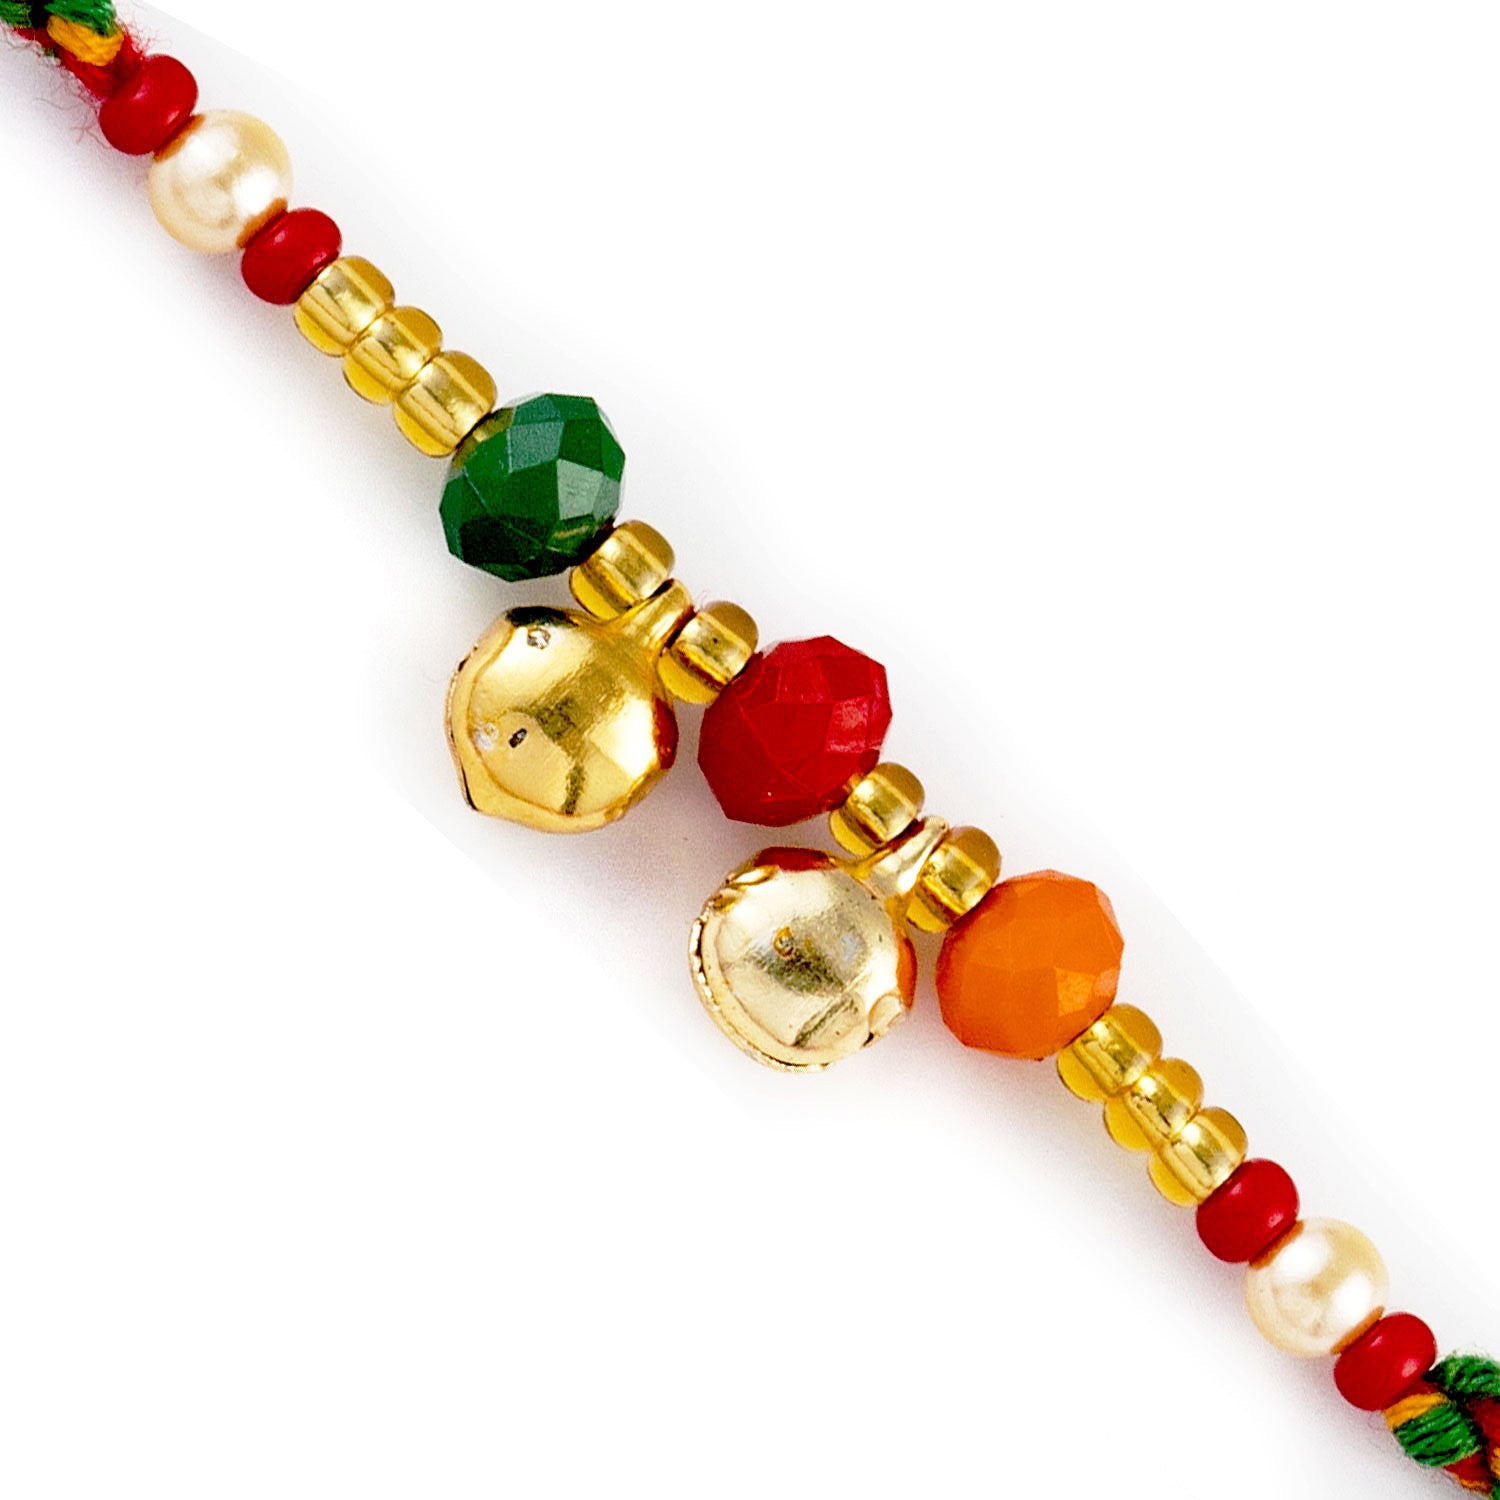 Aapno Rajasthan Colorful Beads Rakhi with Bell - Default Title (PRS1795)